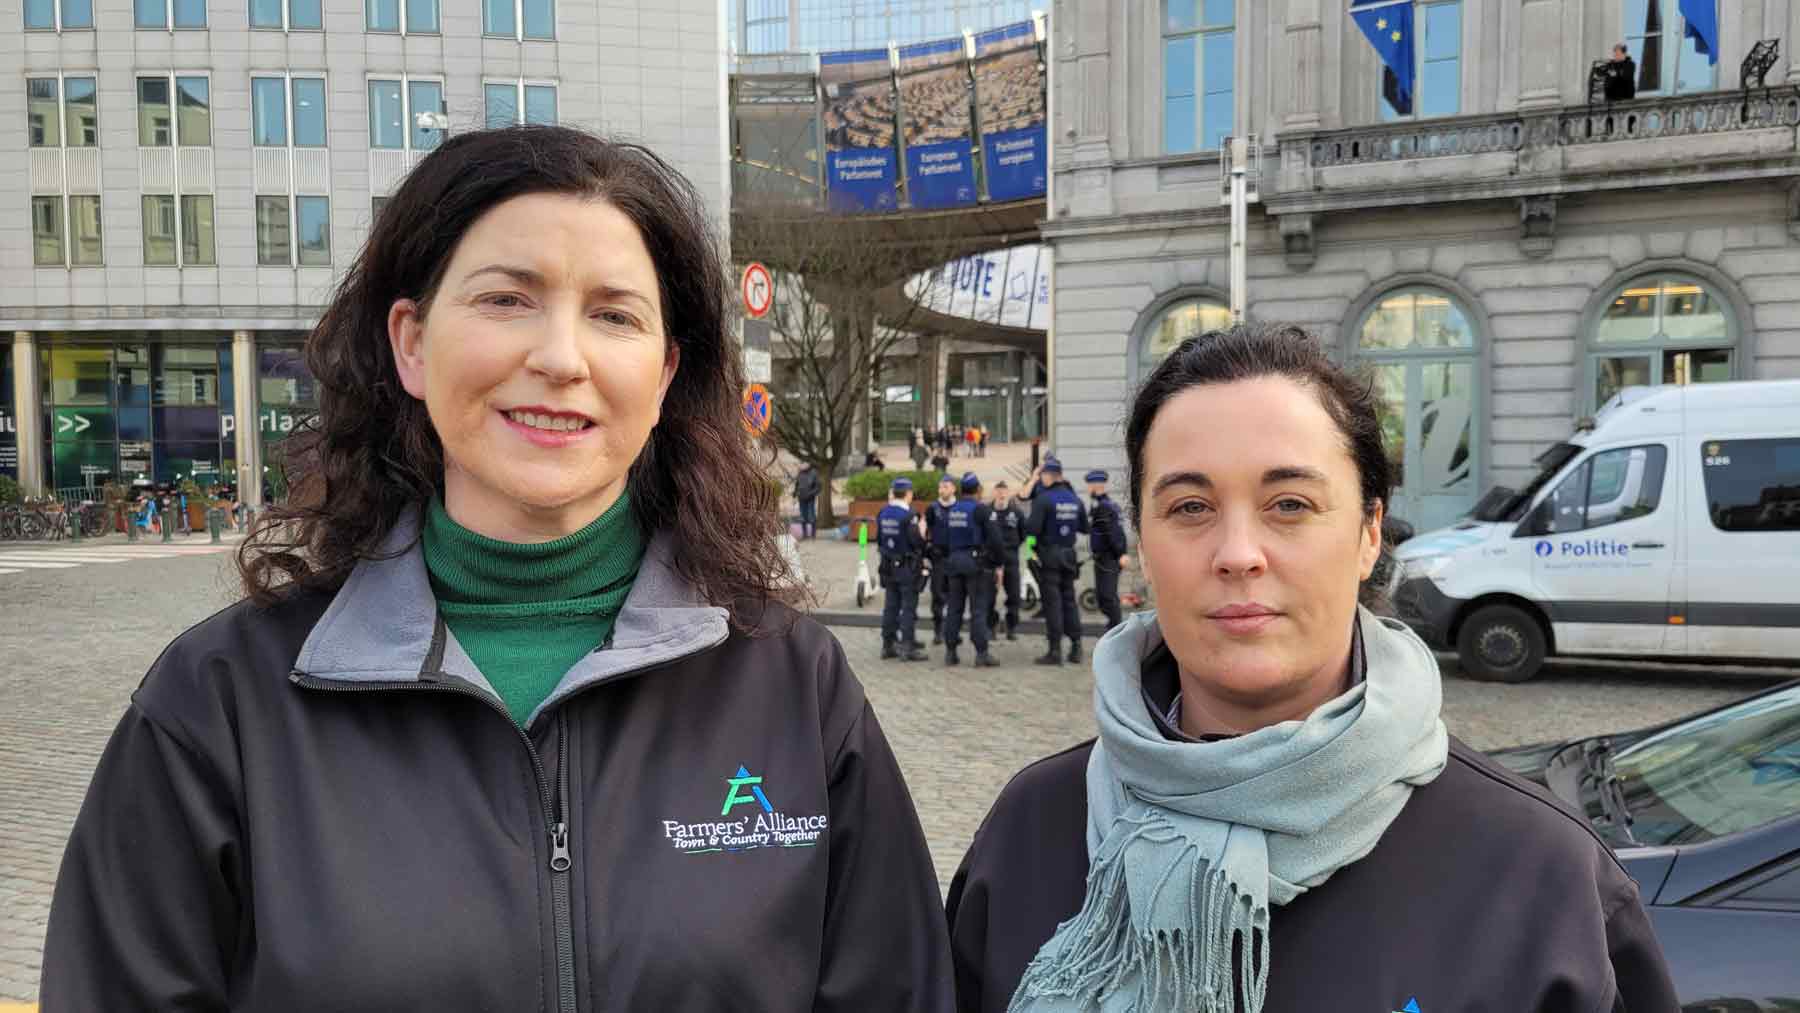 Helen O’Sullivan and Ana Mahe of the recently launched Irish political party Farmers Alliance joined the protest in Brussels.